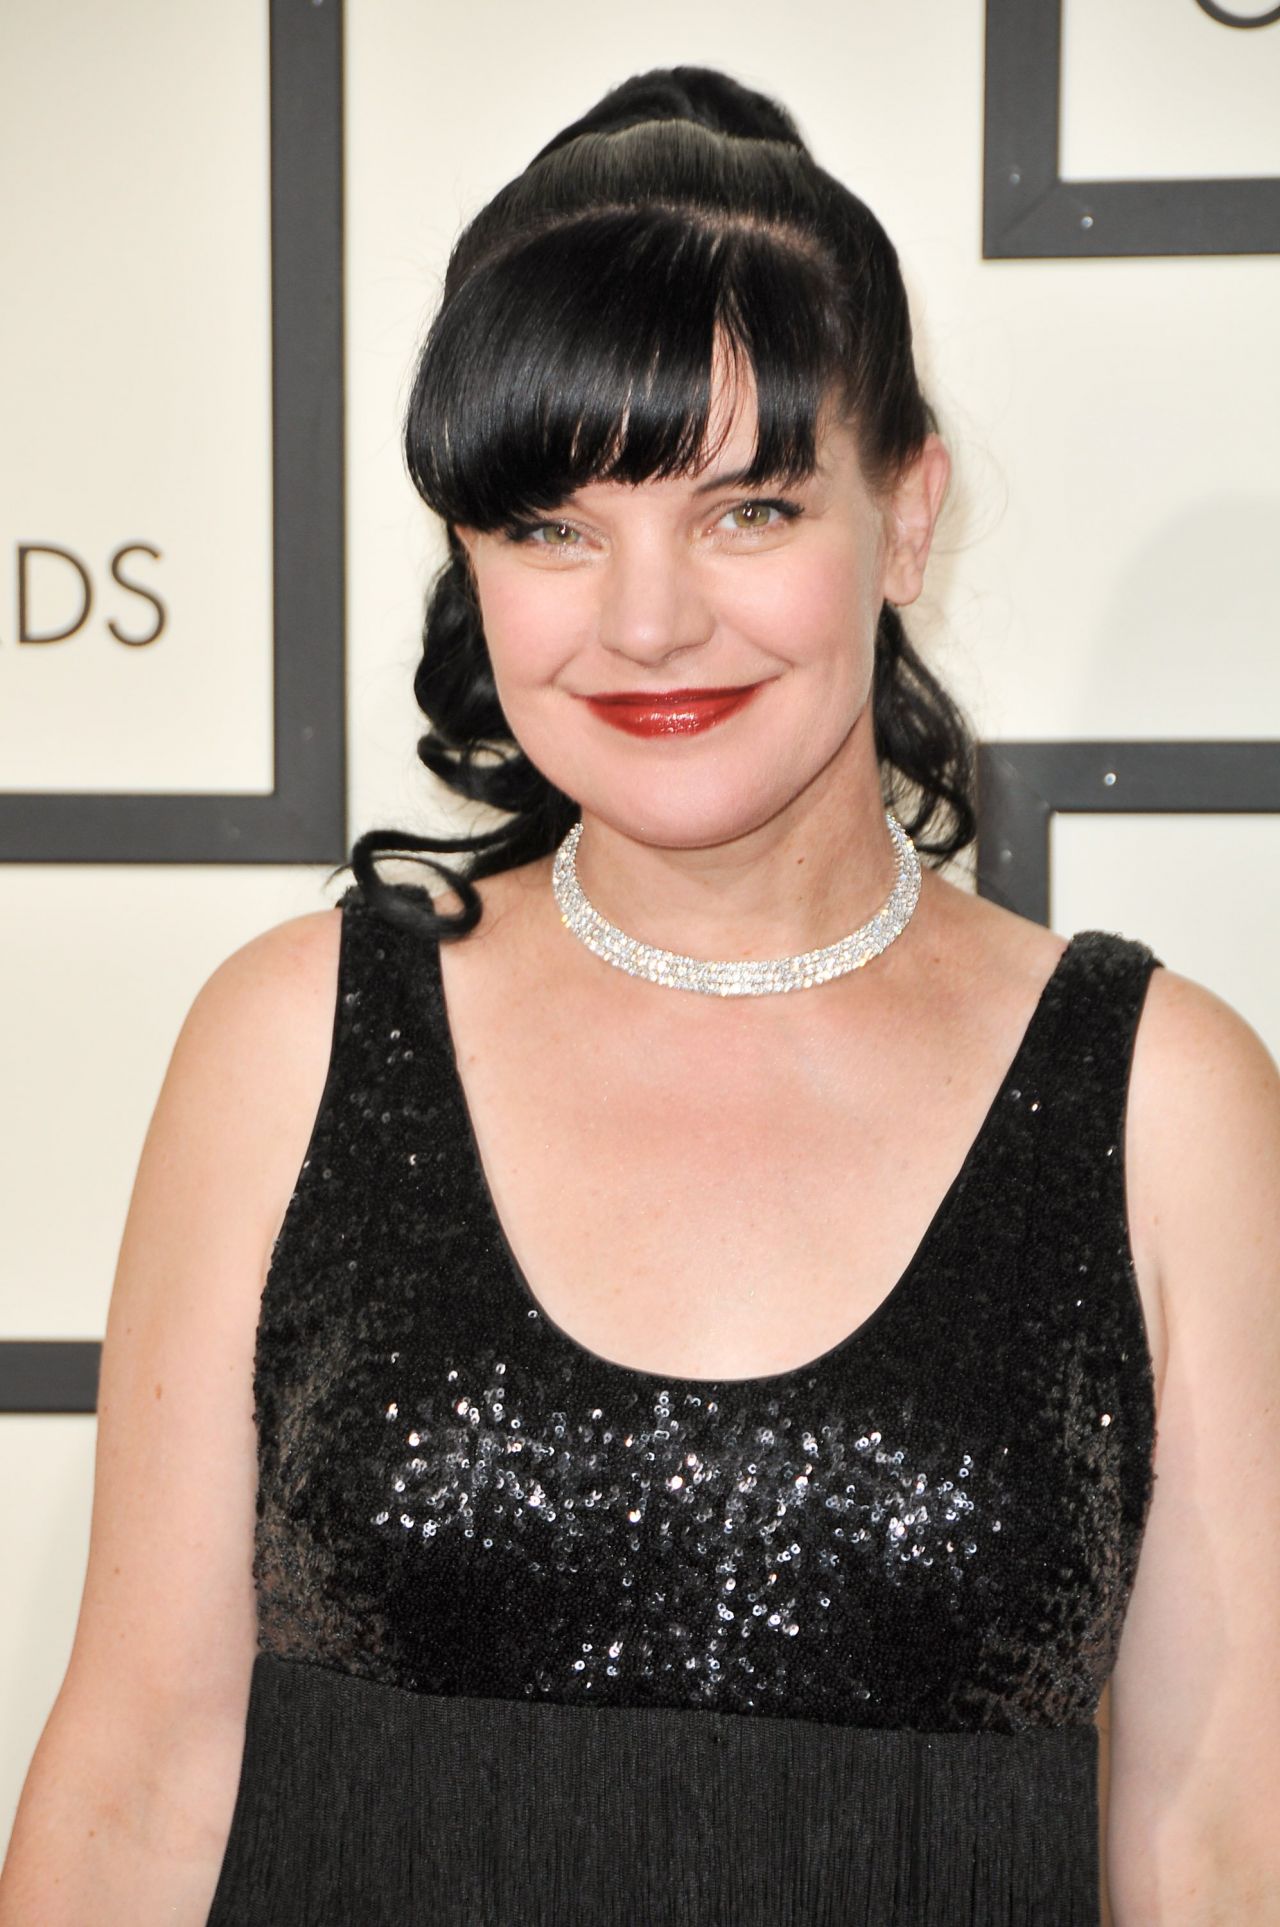 Pauley Perrette Biography - Facts, Childhood, Family Life 